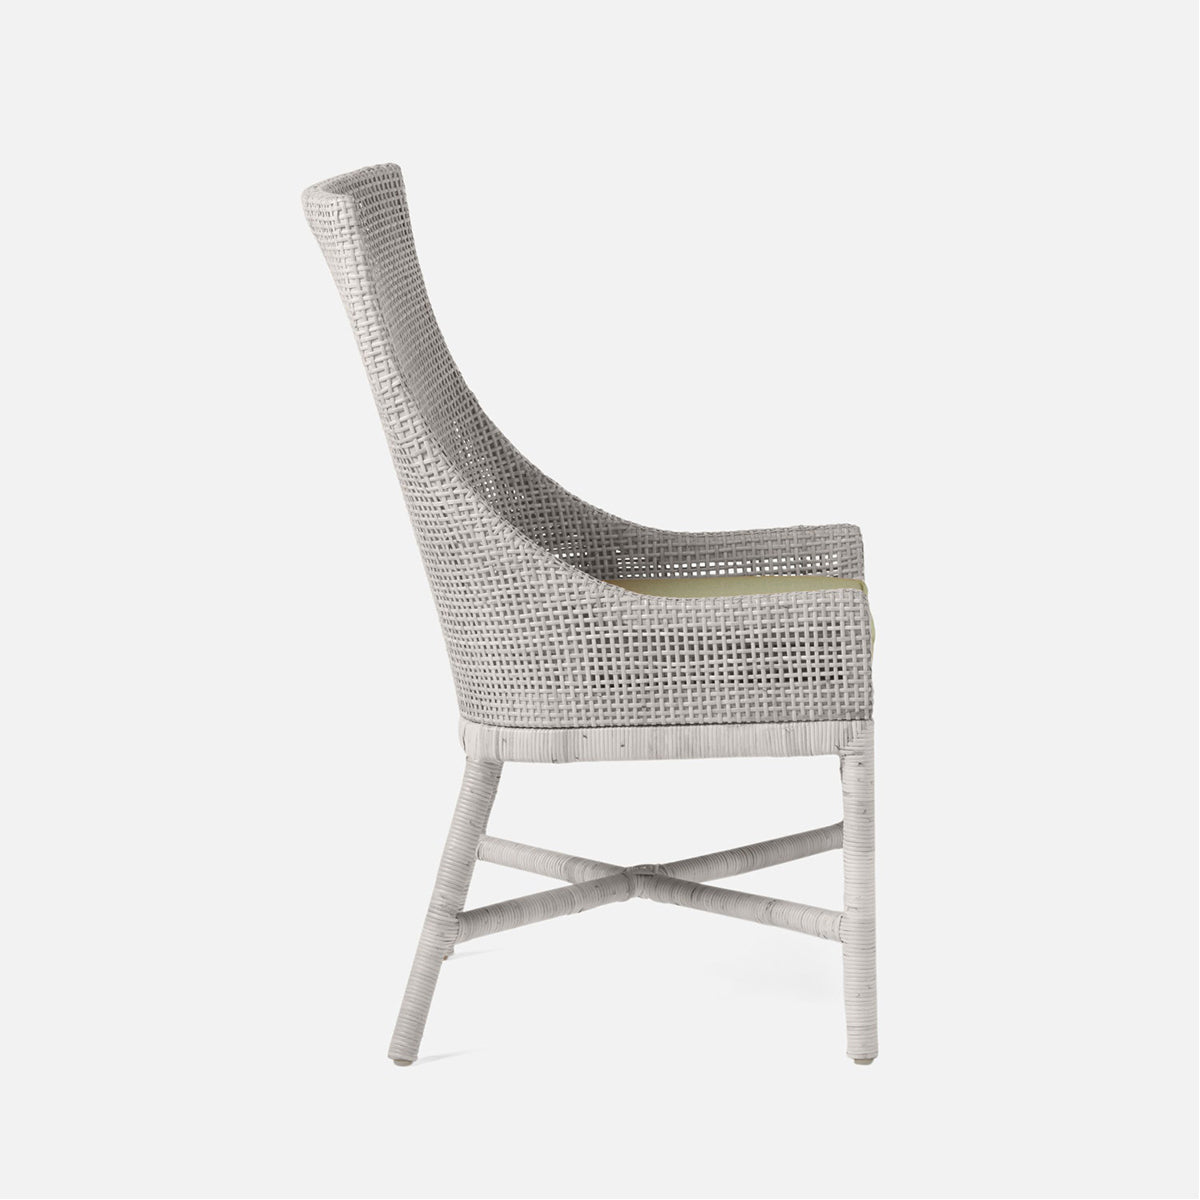 Made Goods Isla Woven Rattan Dining Chair in Aras Mohair